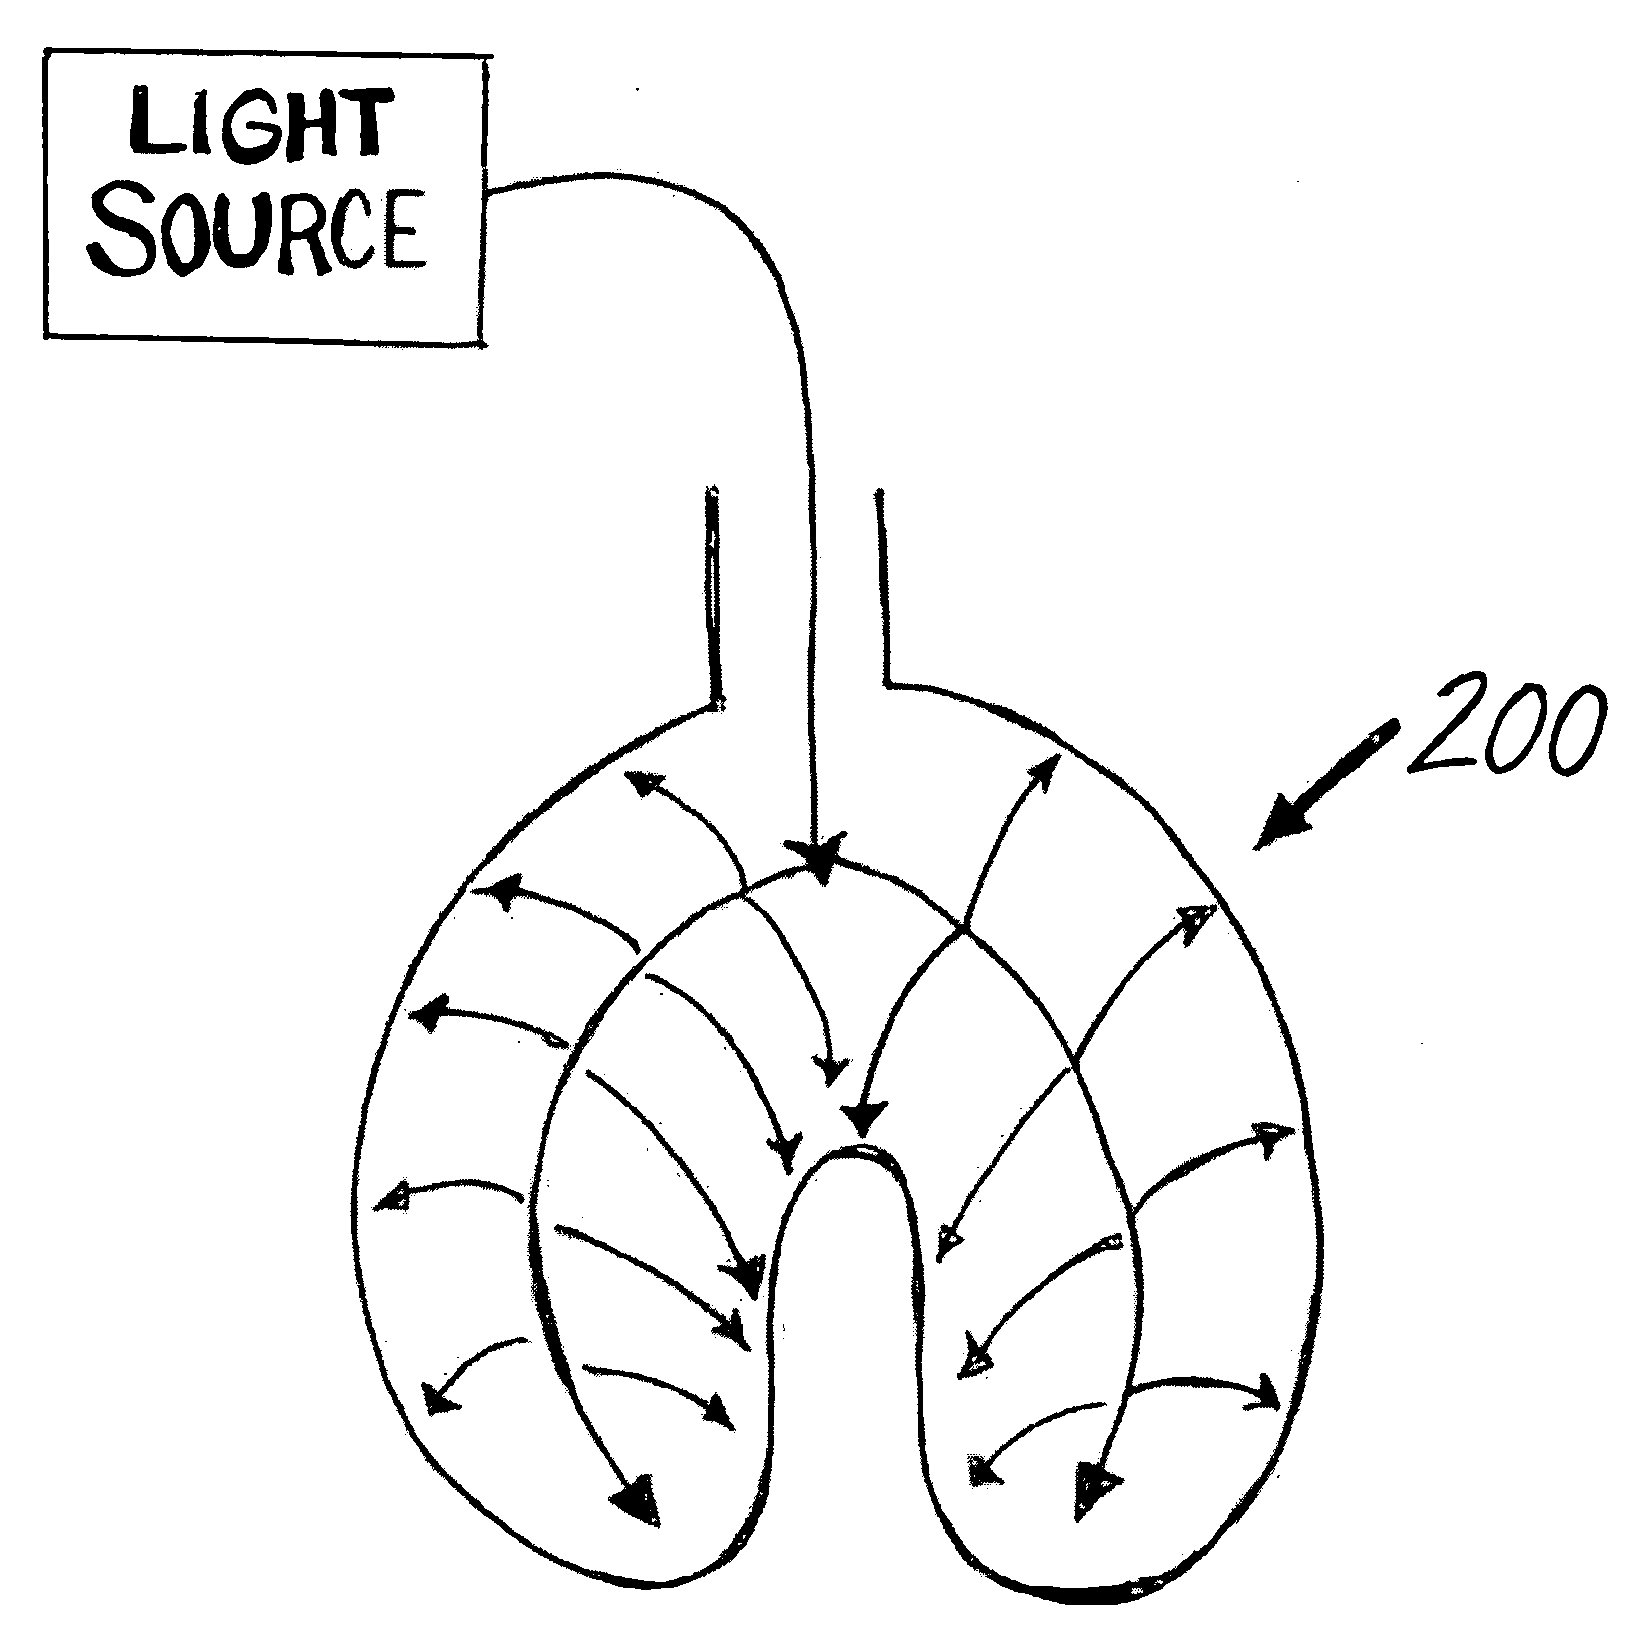 Method and device for improving oral health